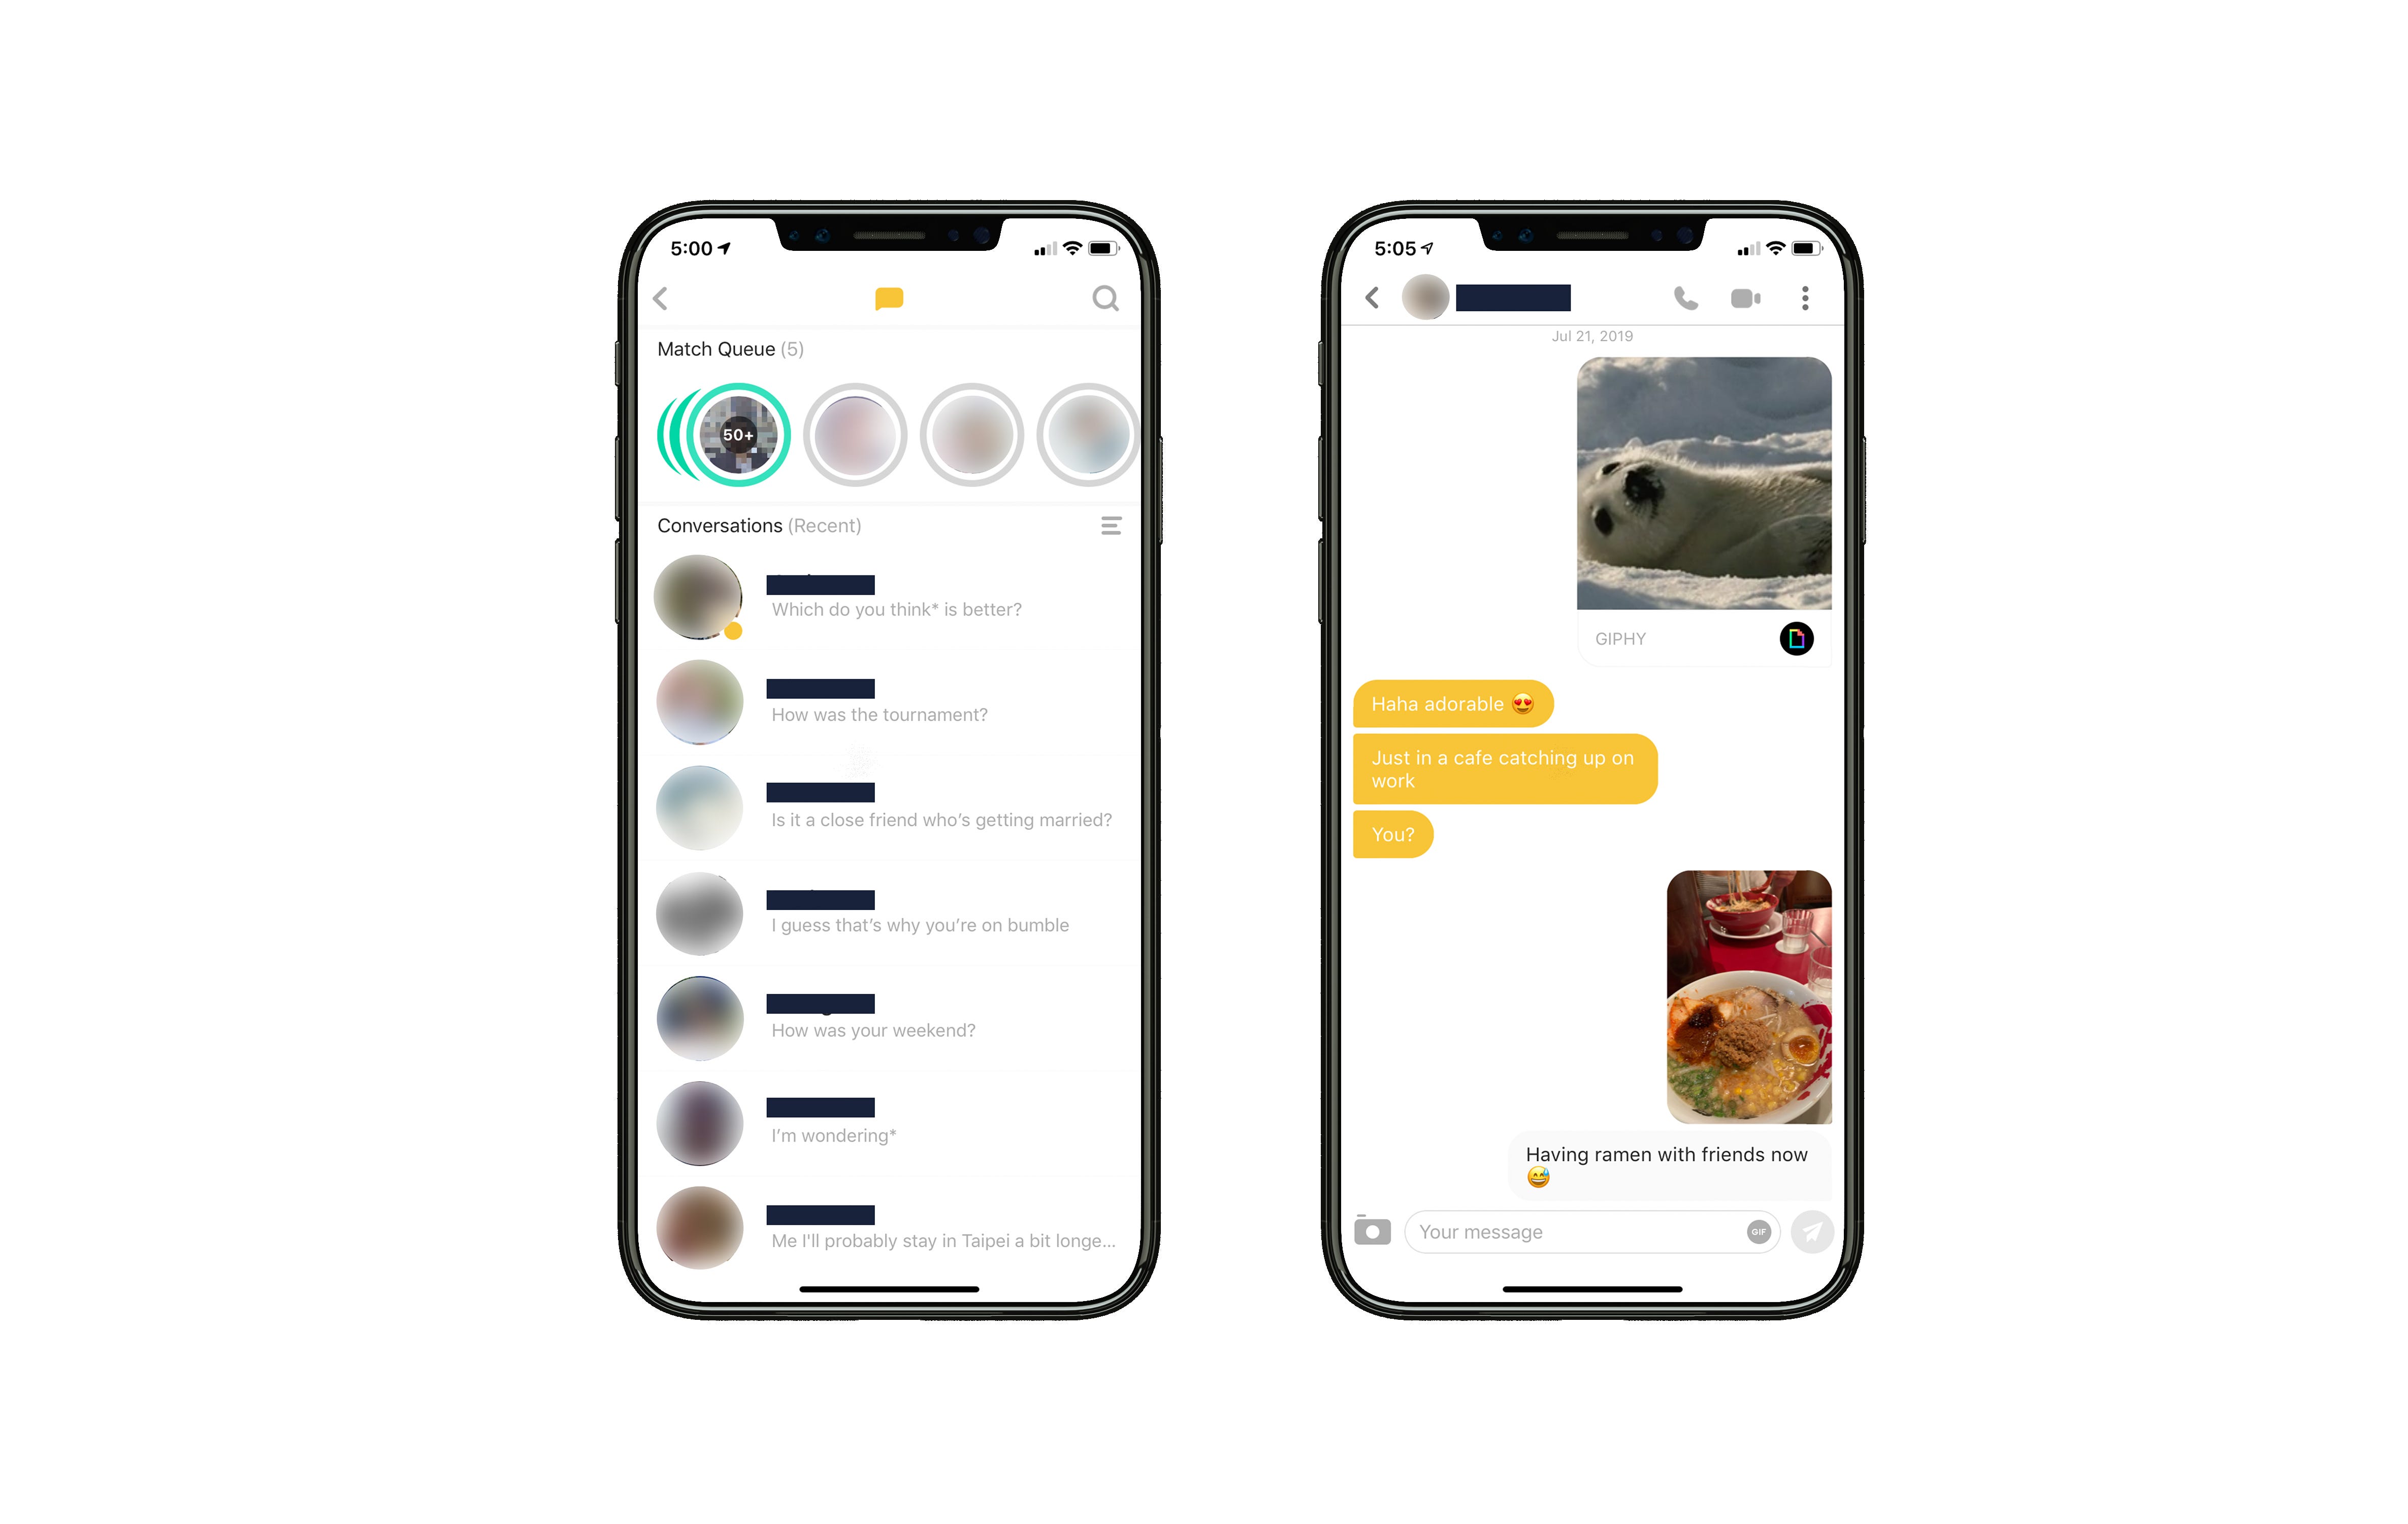 You can not only send photos on Bumble, but also make audio calls and even video calls!